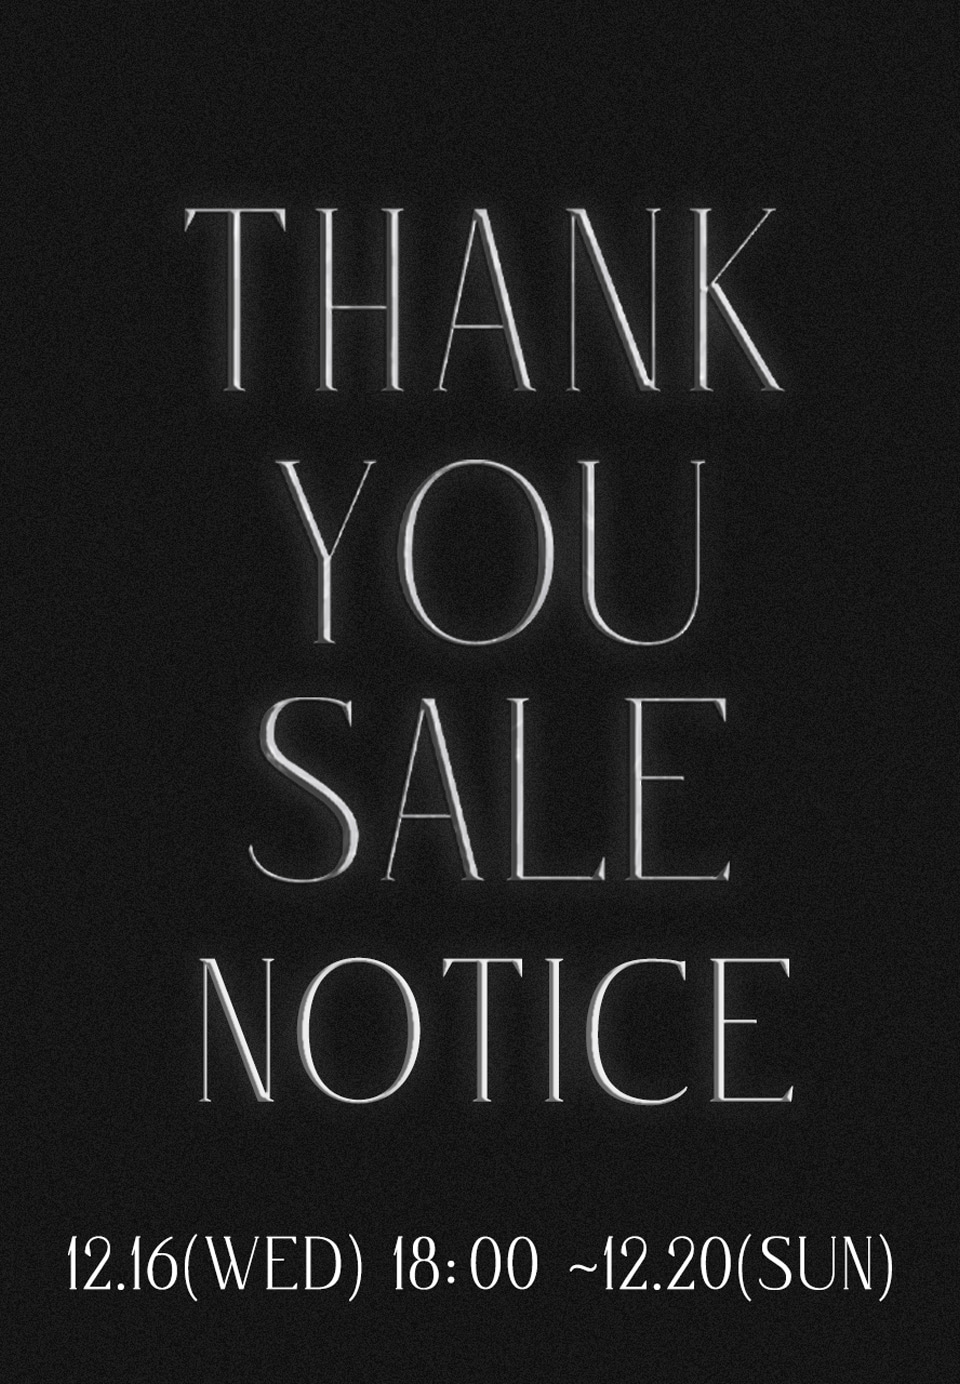 THANK YOU SALE NOTICE